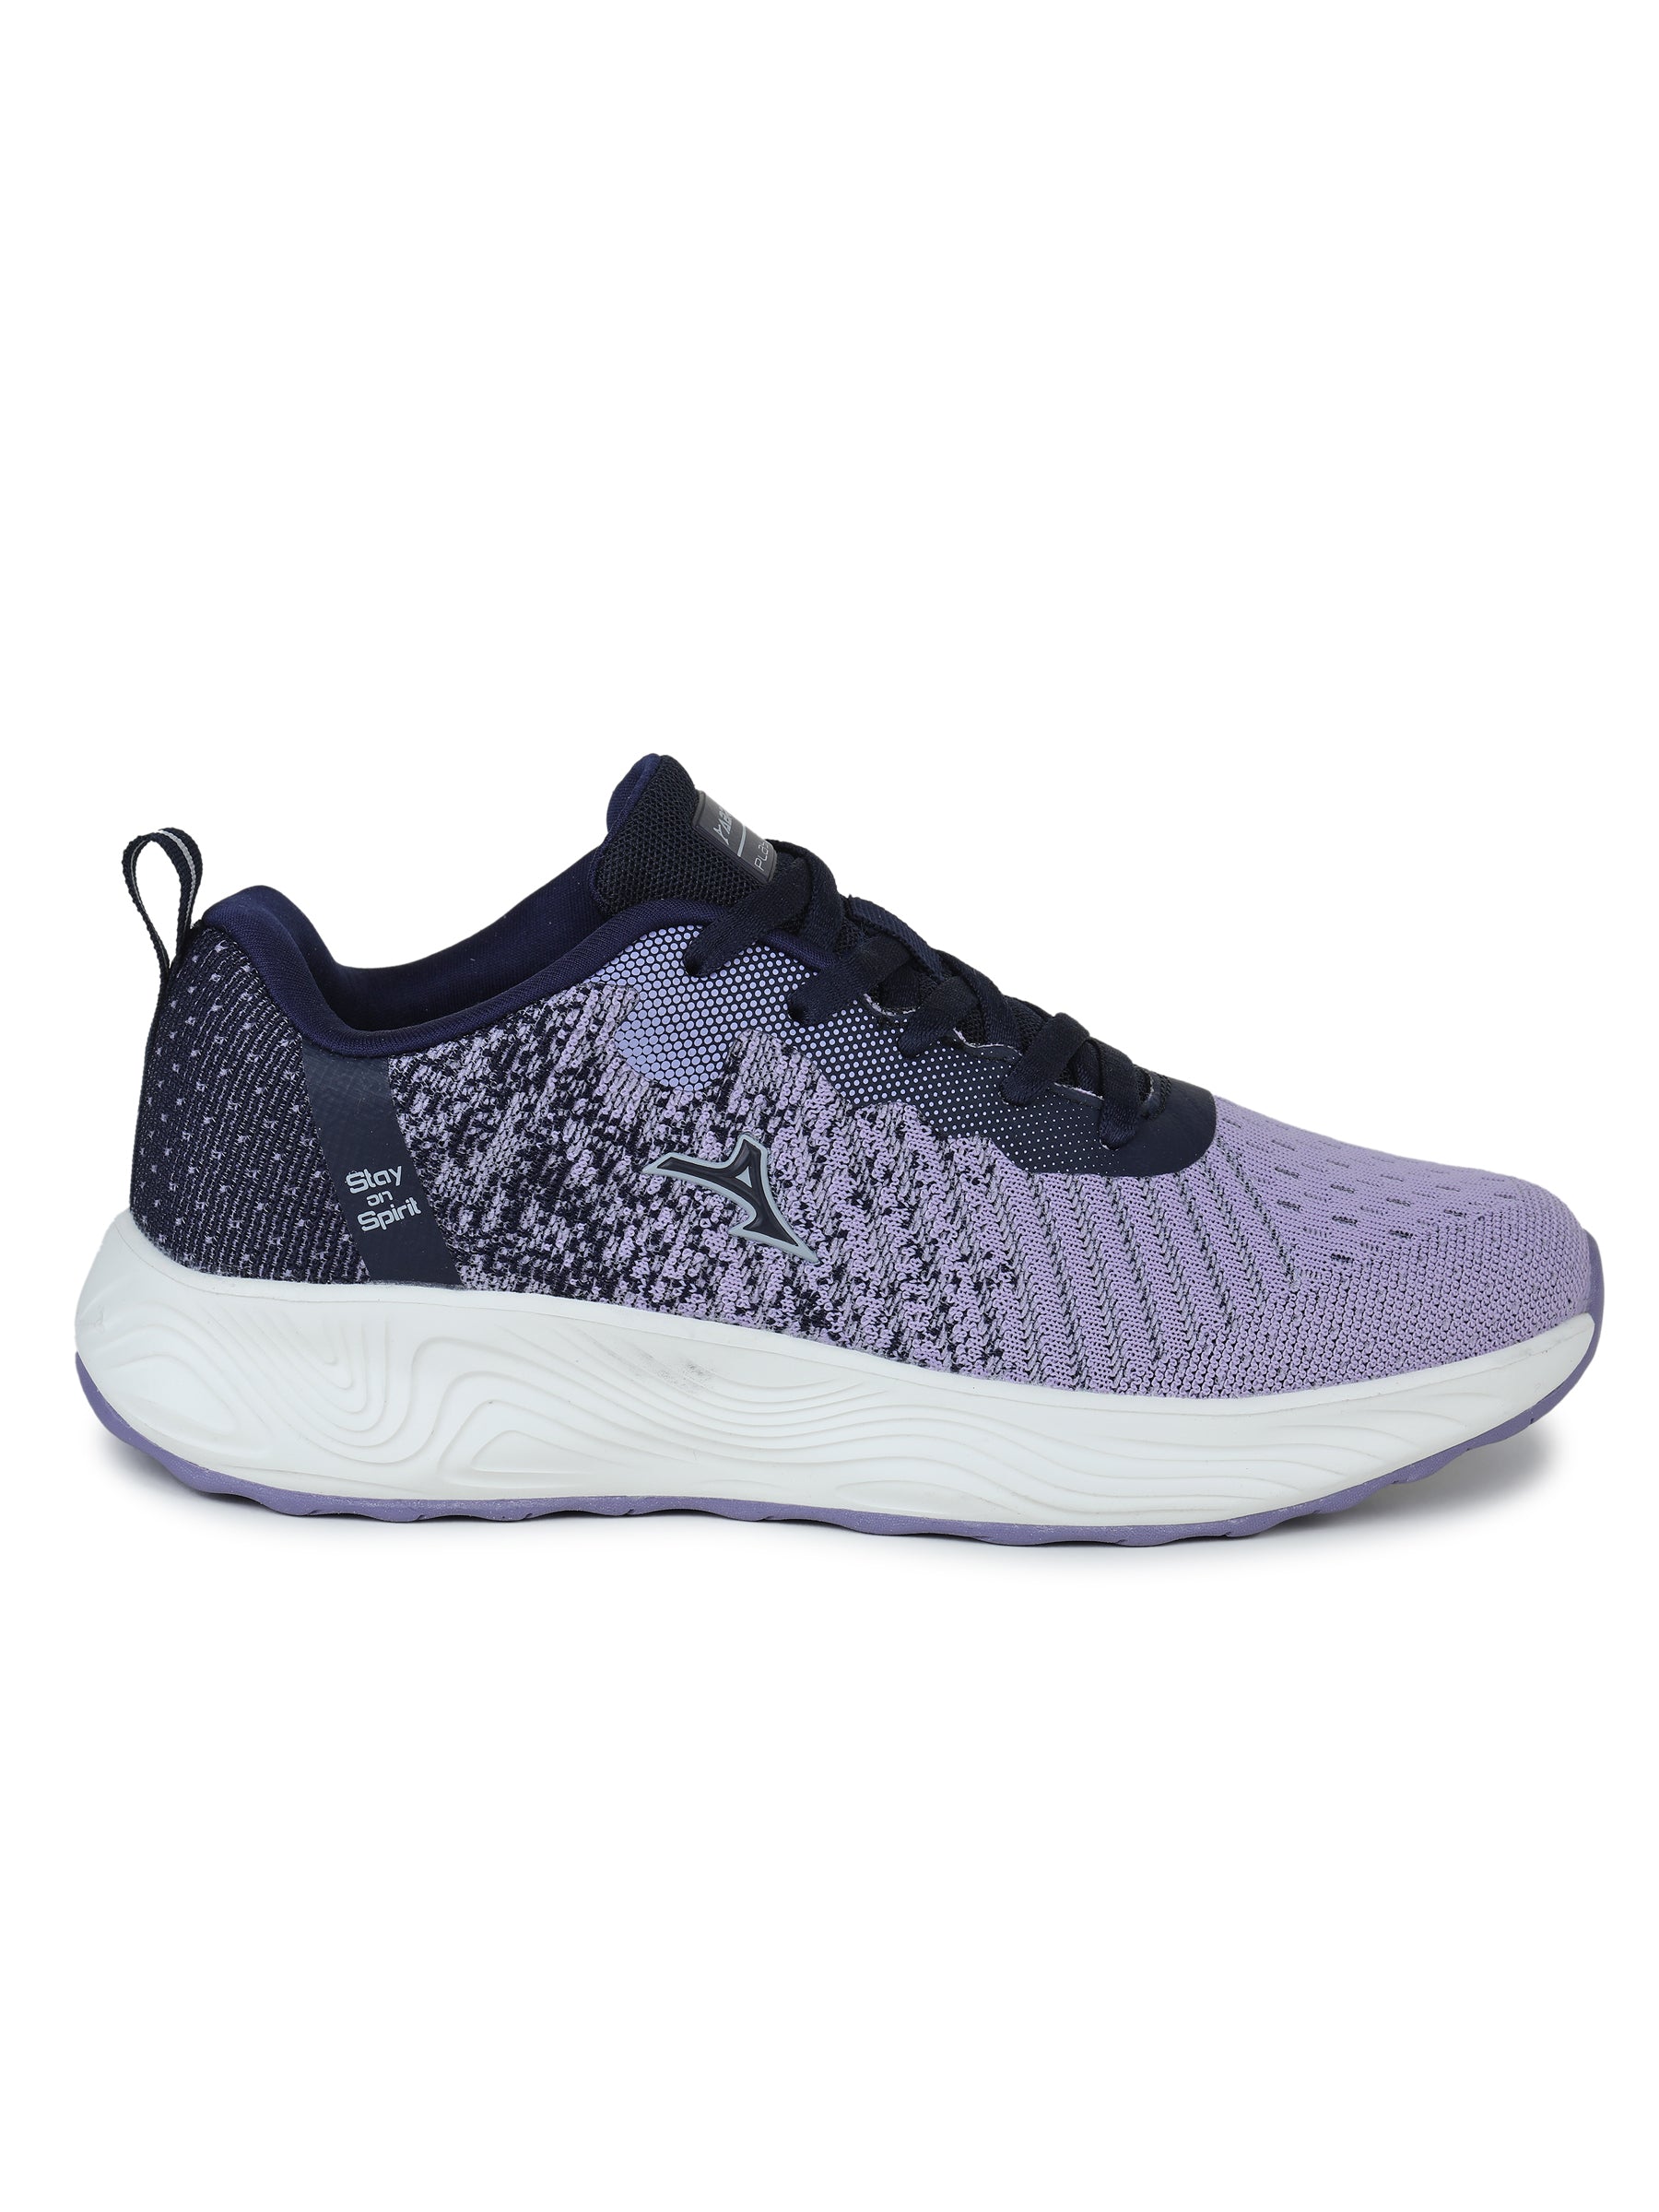 WILLOW SPORTS SHOES FOR WOMEN